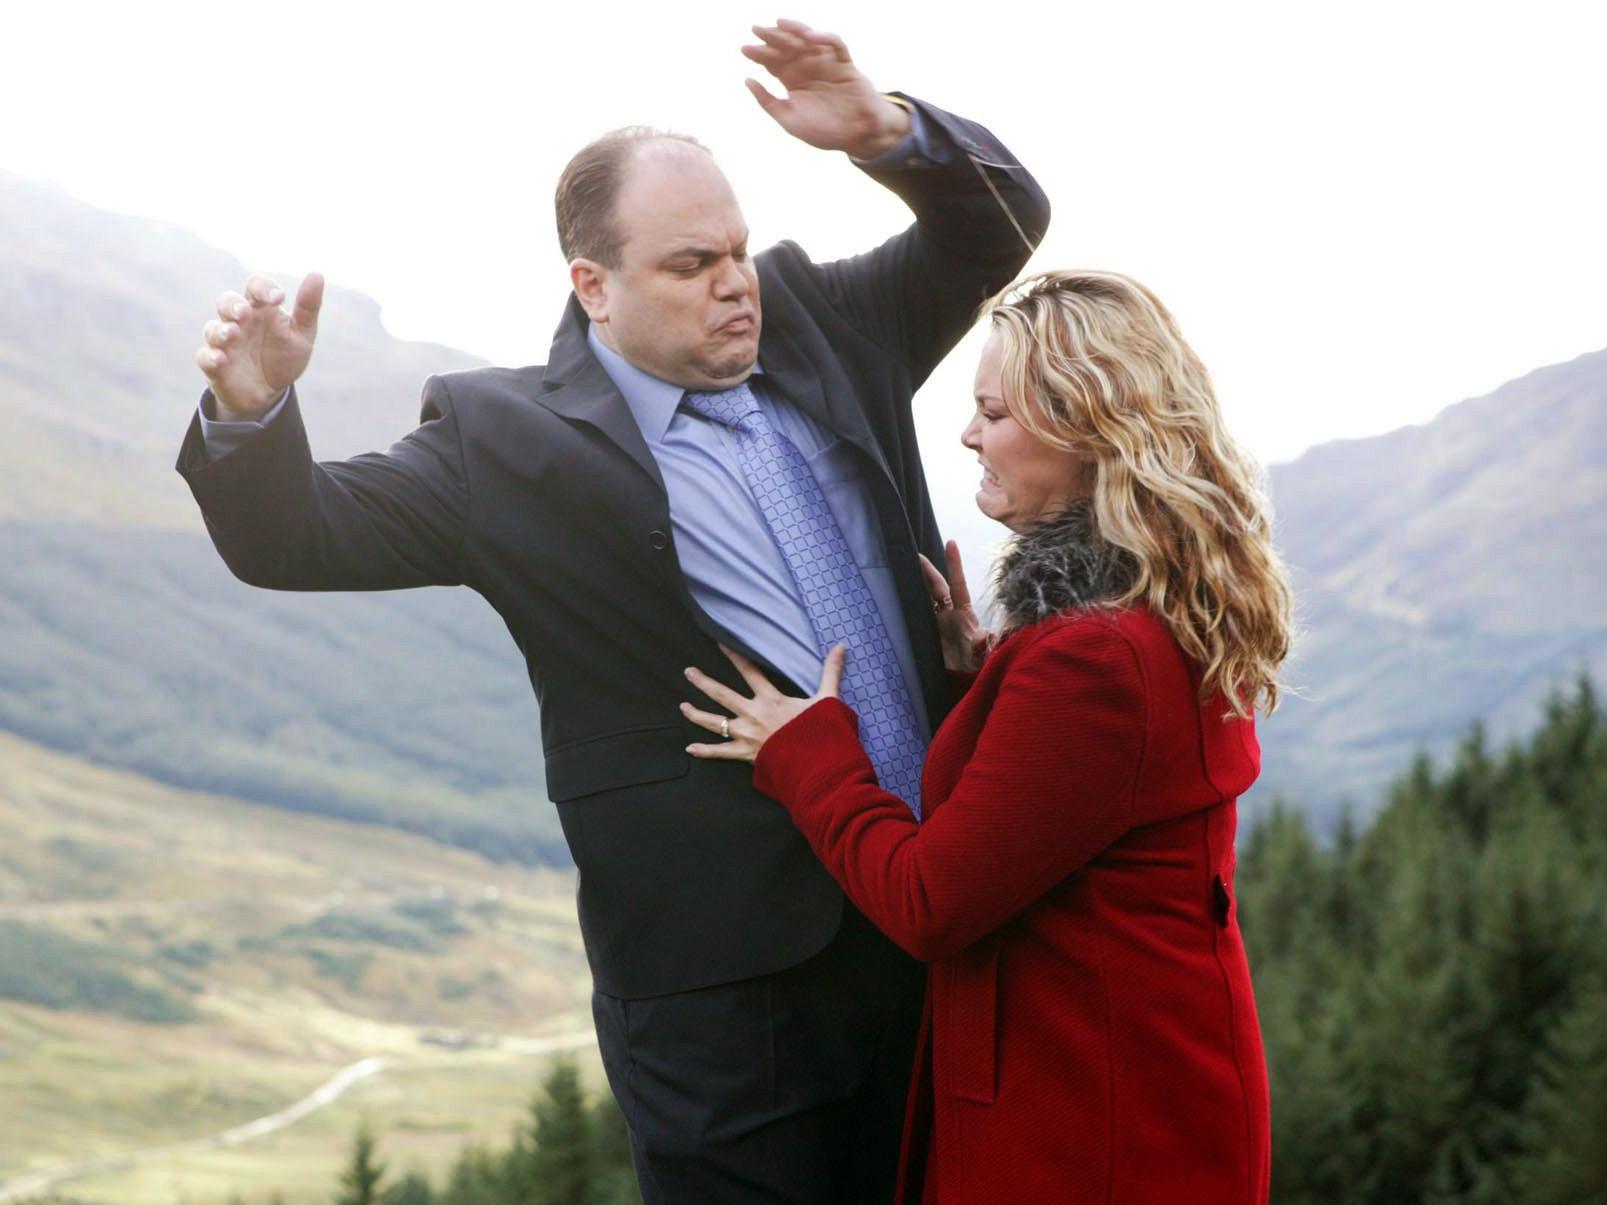 Down he goes: Barry (Shaun Williamson) is pushed off a cliff by his new bride Janine (Charlie Brooks) in a memorable 2003 episode of EastEnders